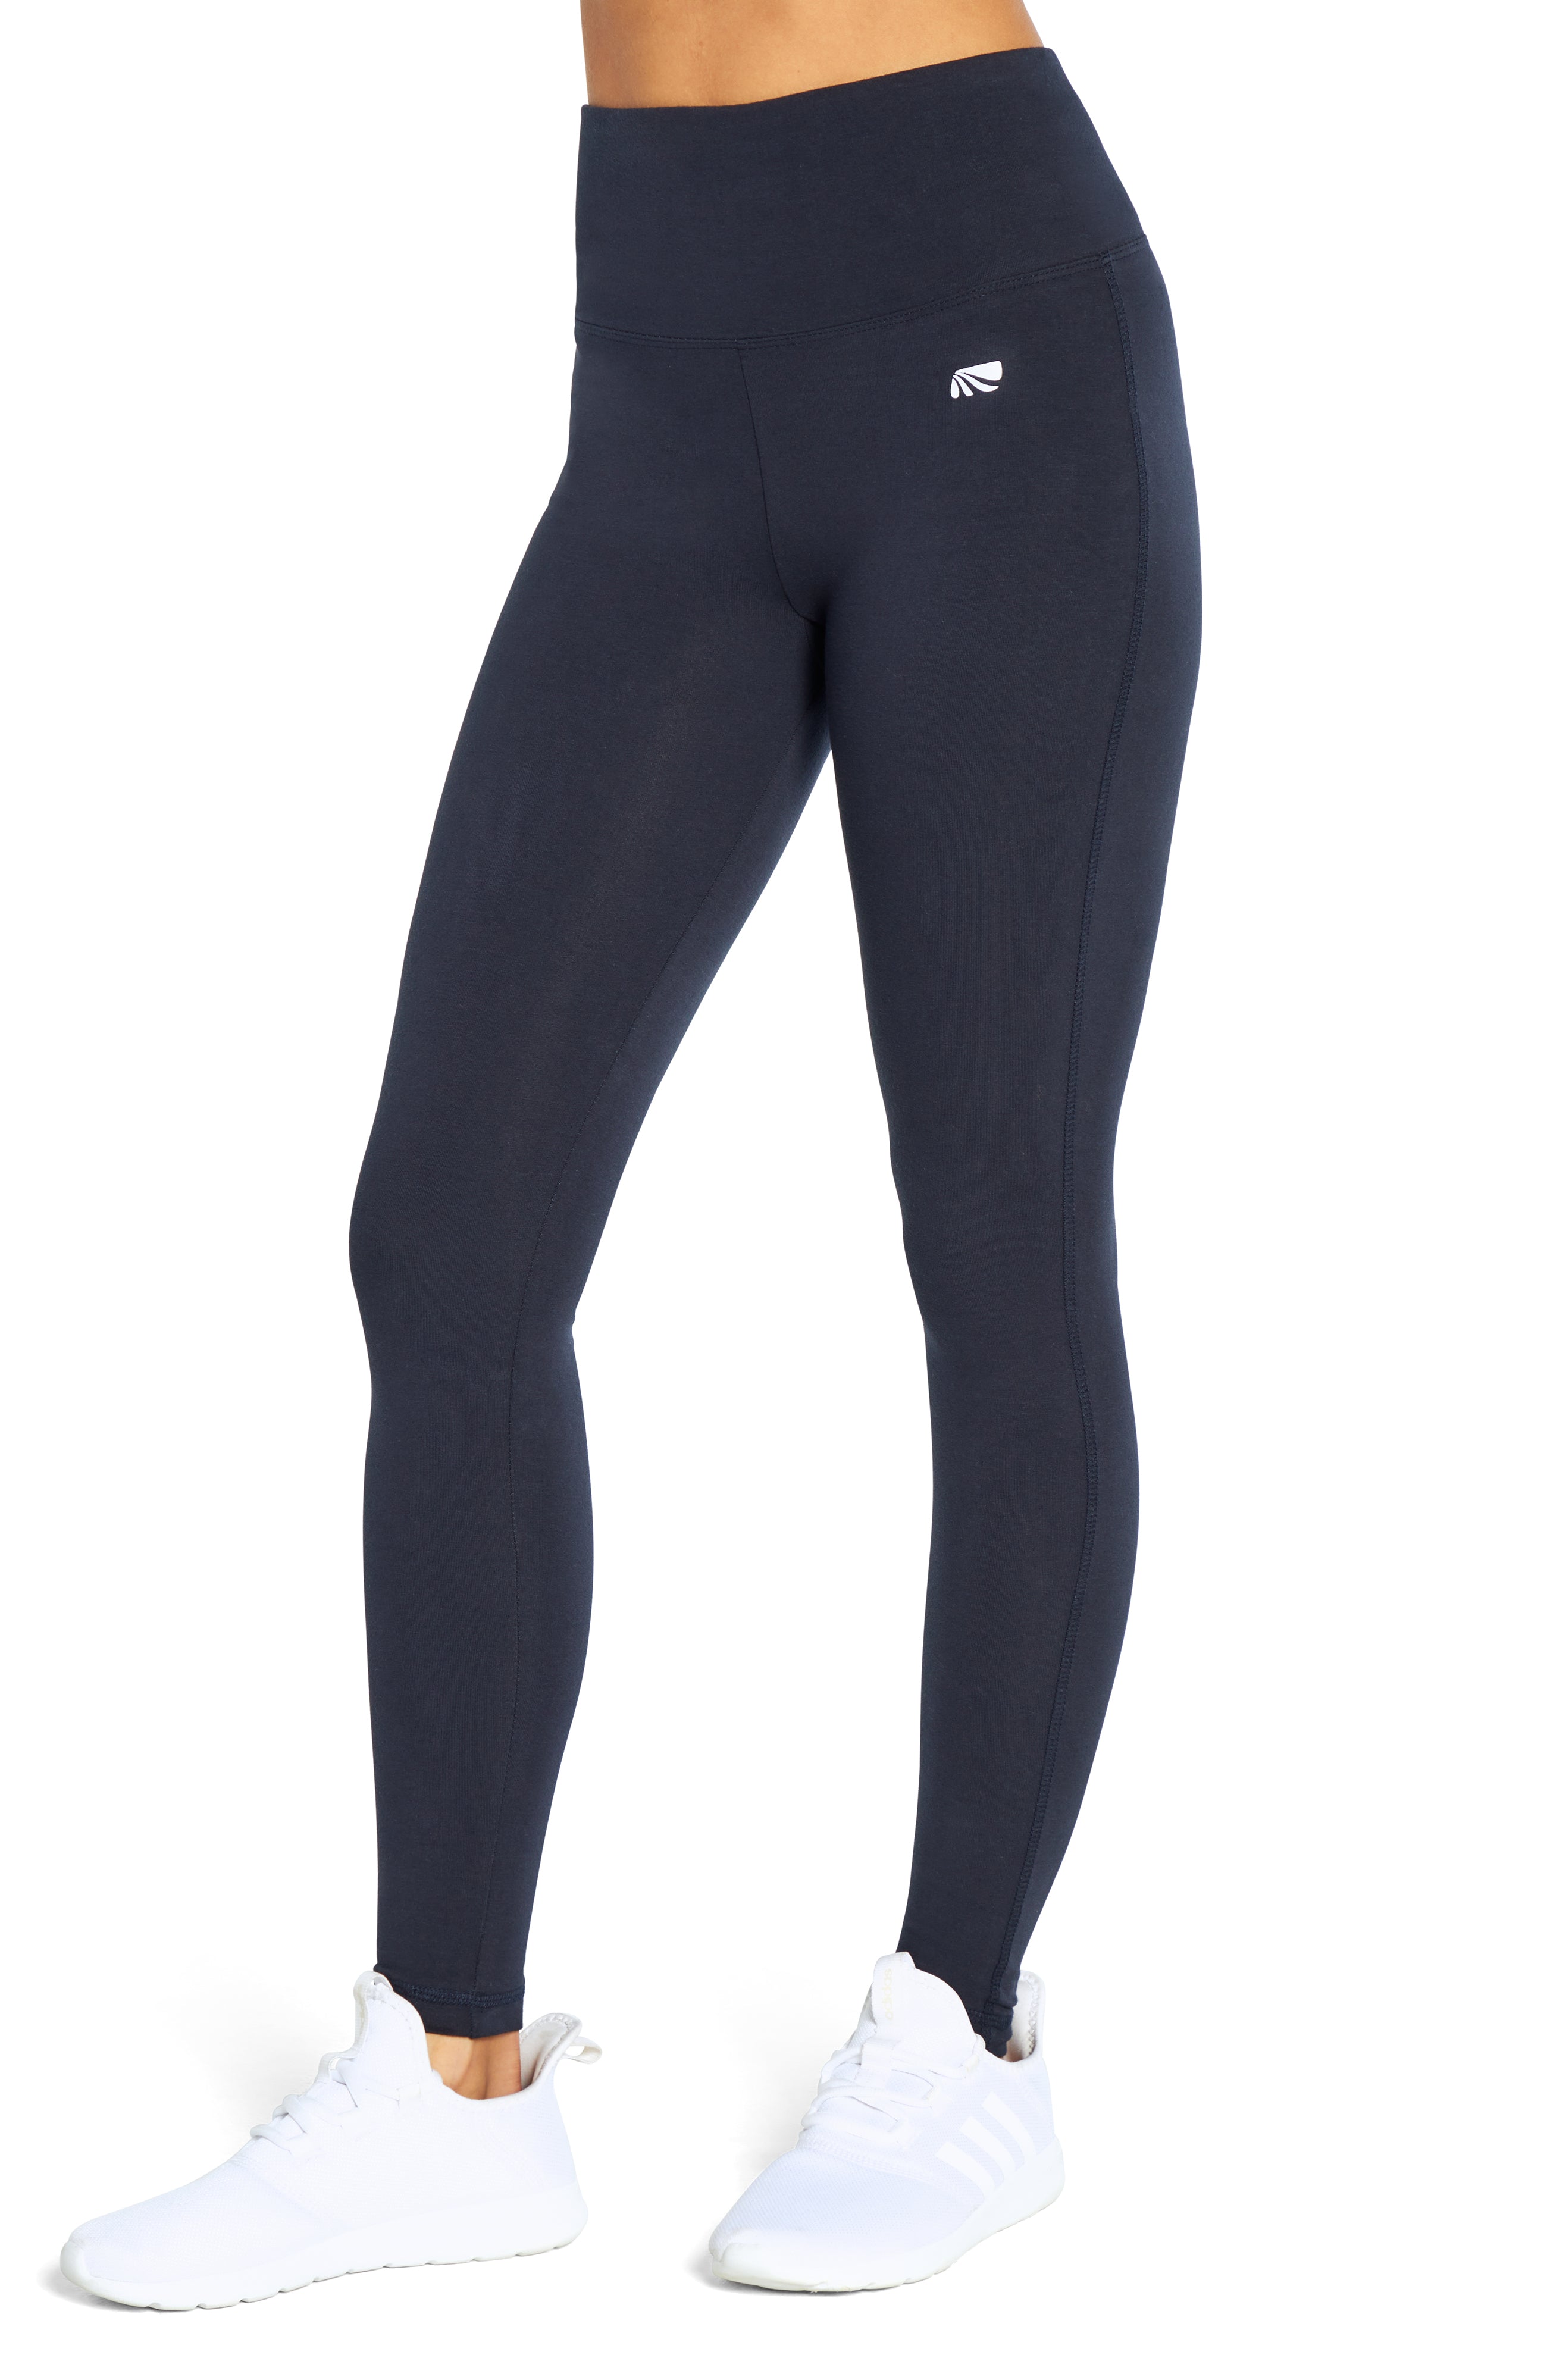 Athletic Leggings Only $11.99 on Zulily (Marika, Bally Total Fitness &  Balance Collection)